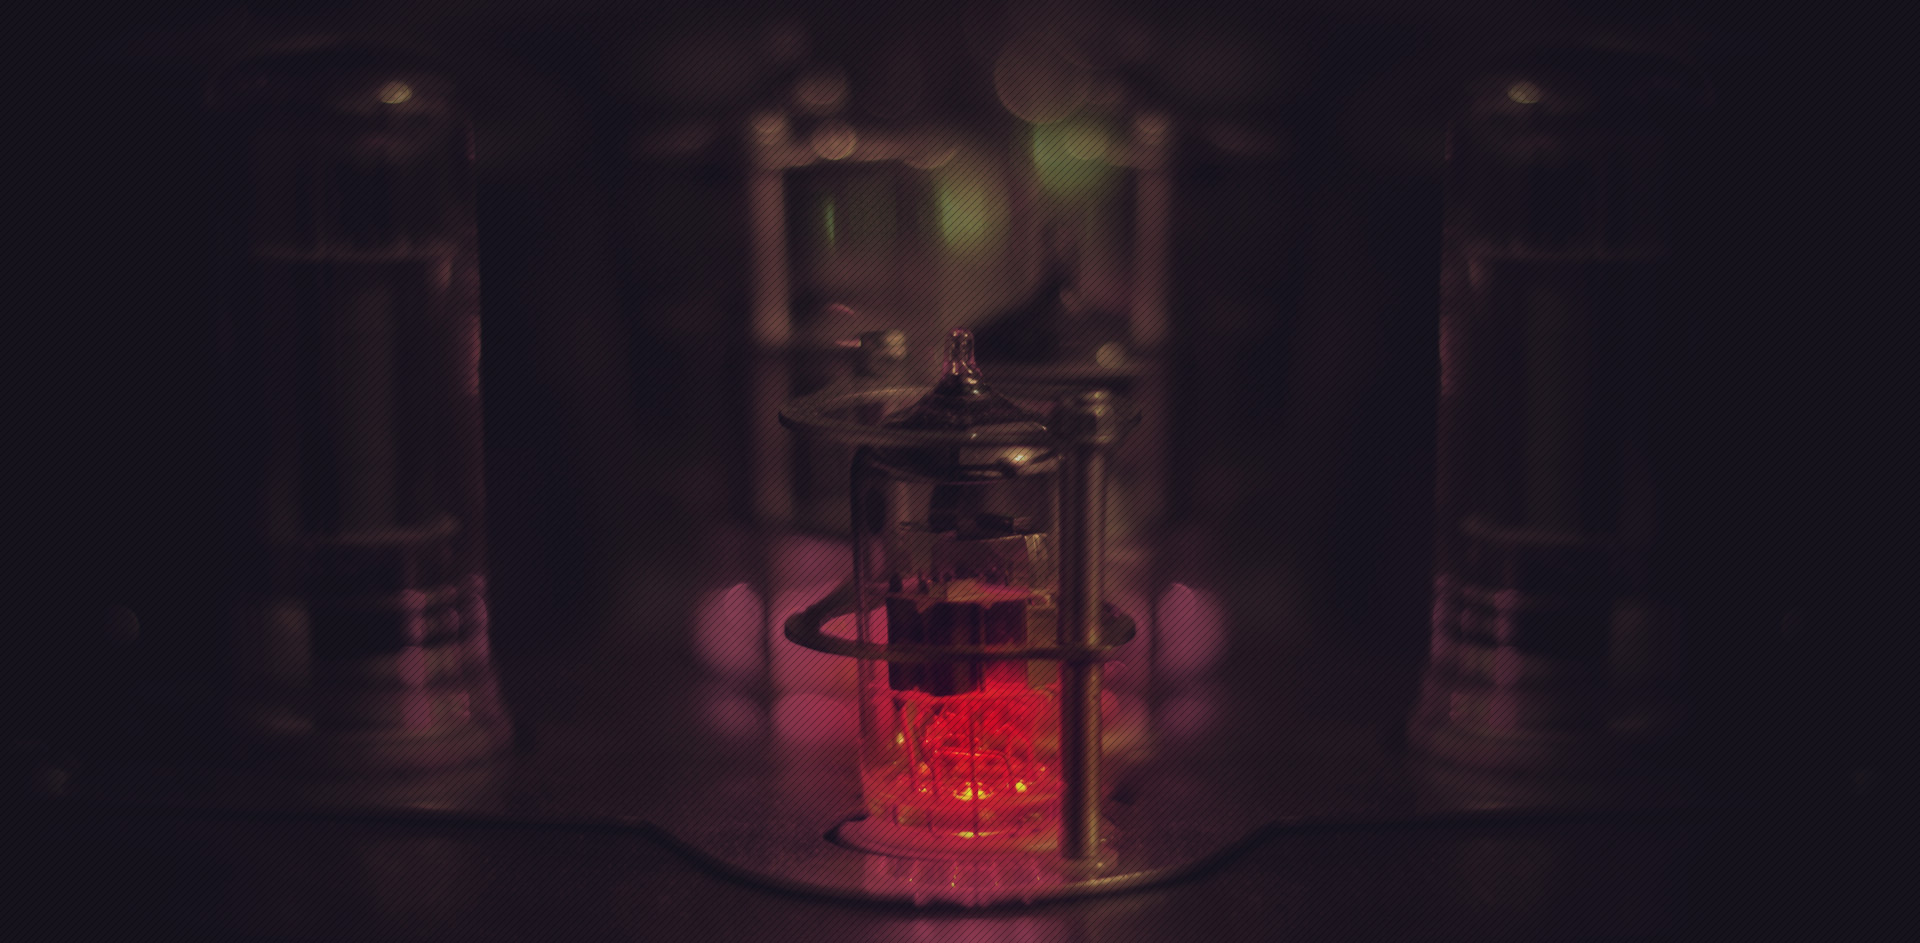 Amplified Design Tube Amp background image red